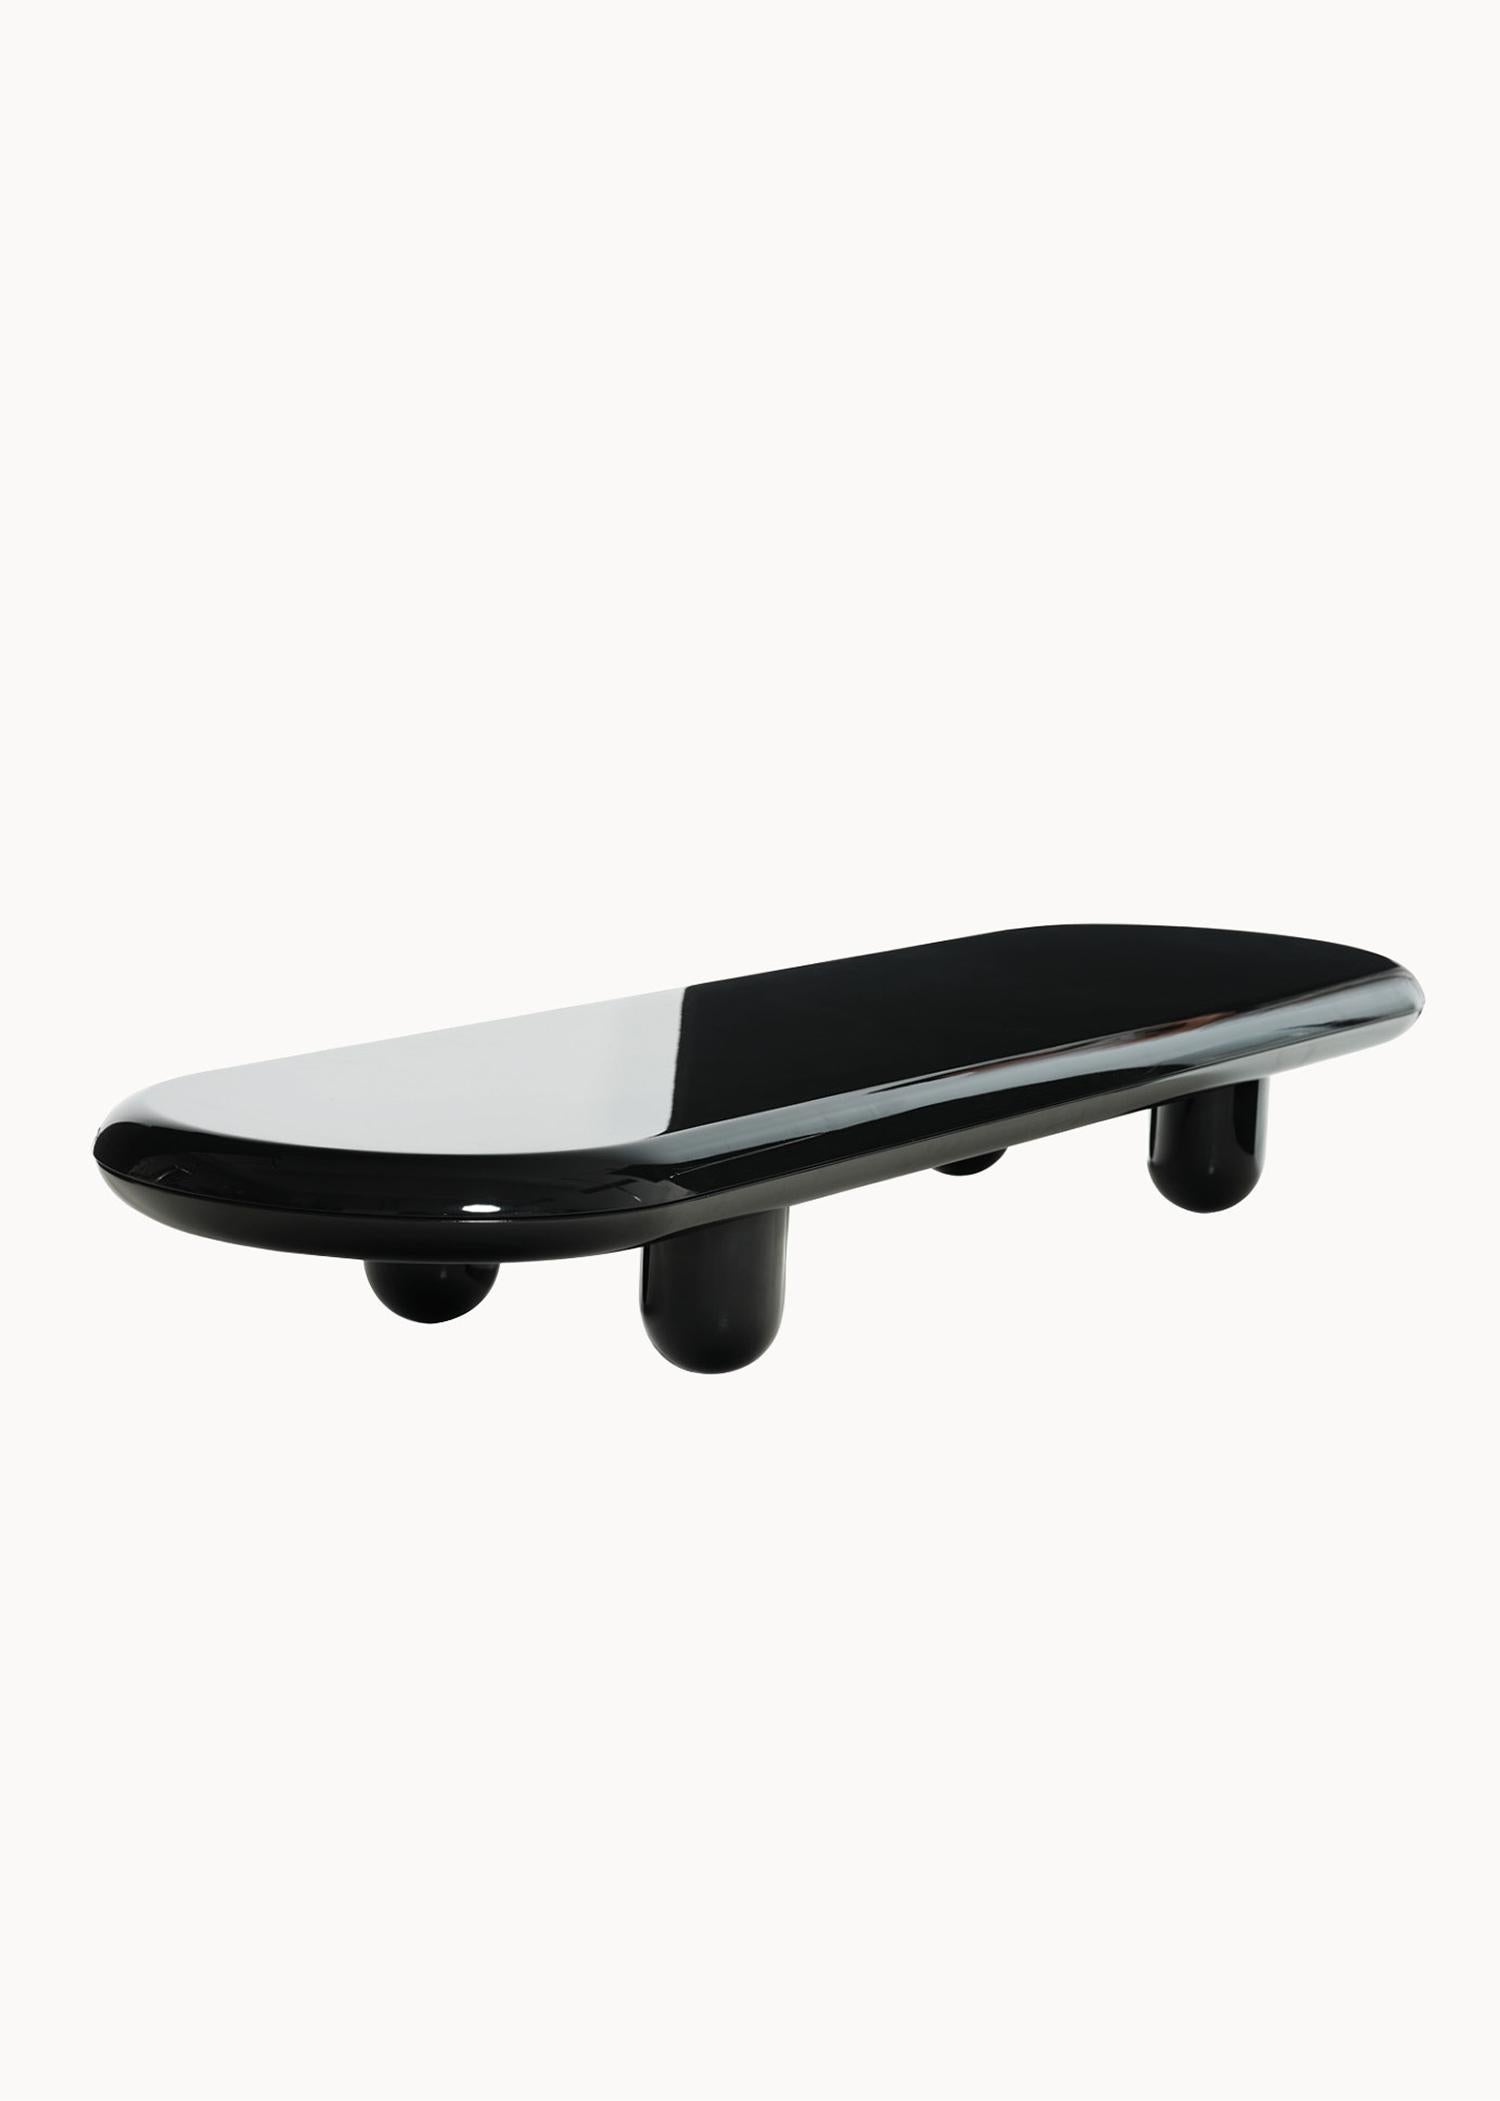 Organic Modern Contemporary Coffee Table 'Explorer' by Jaime Hayon, Black, 234 cm For Sale